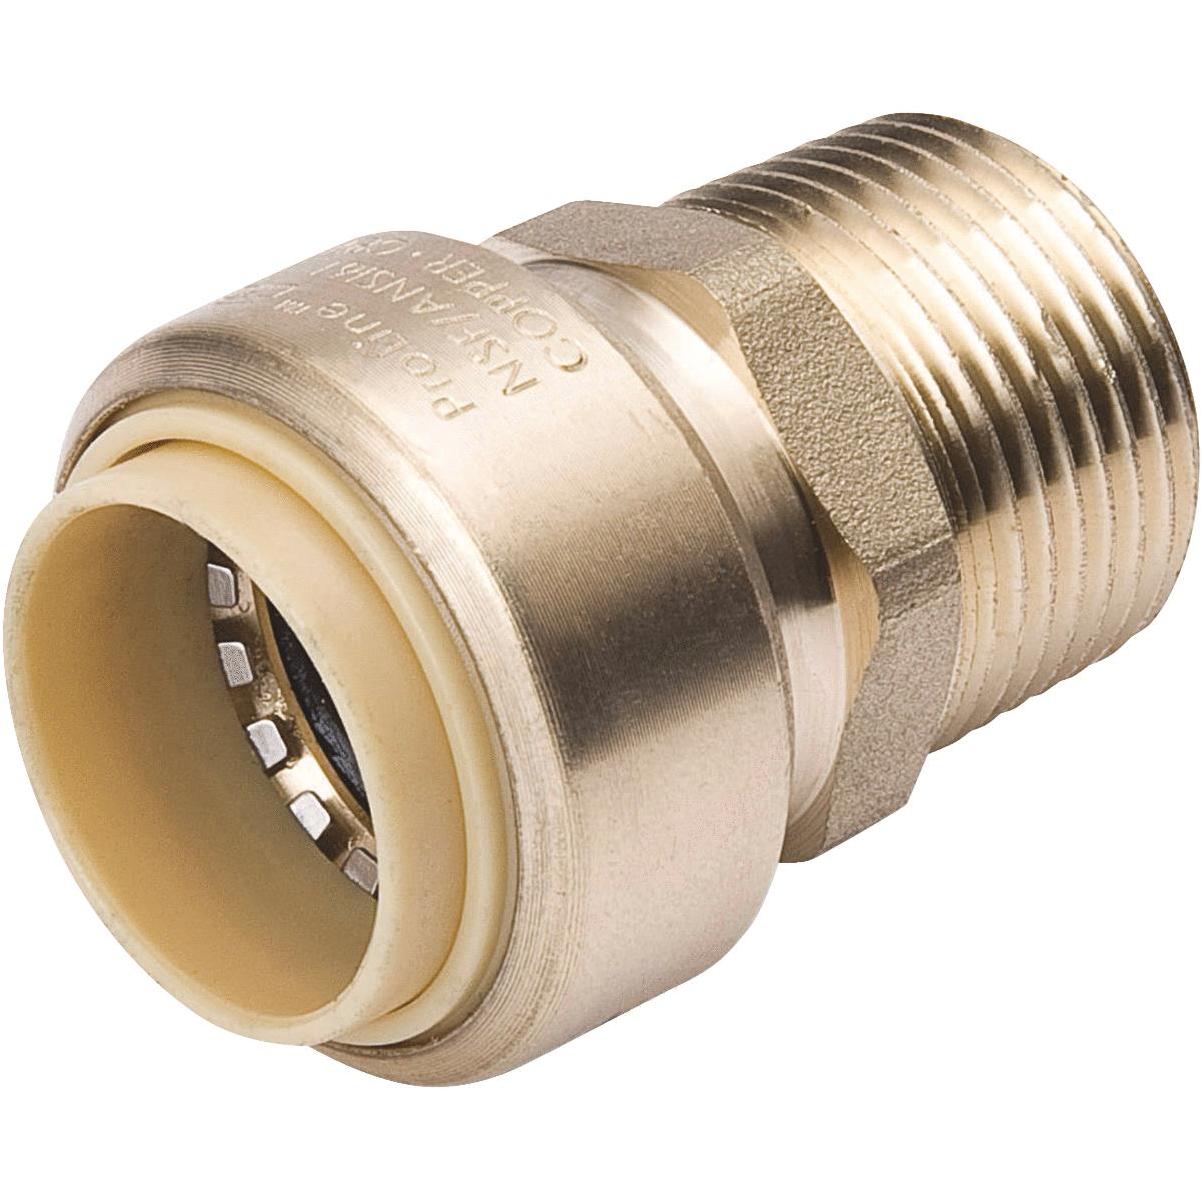 Proline Series 3/4-in x 1-in Threaded Male Adapter Bushing Fitting